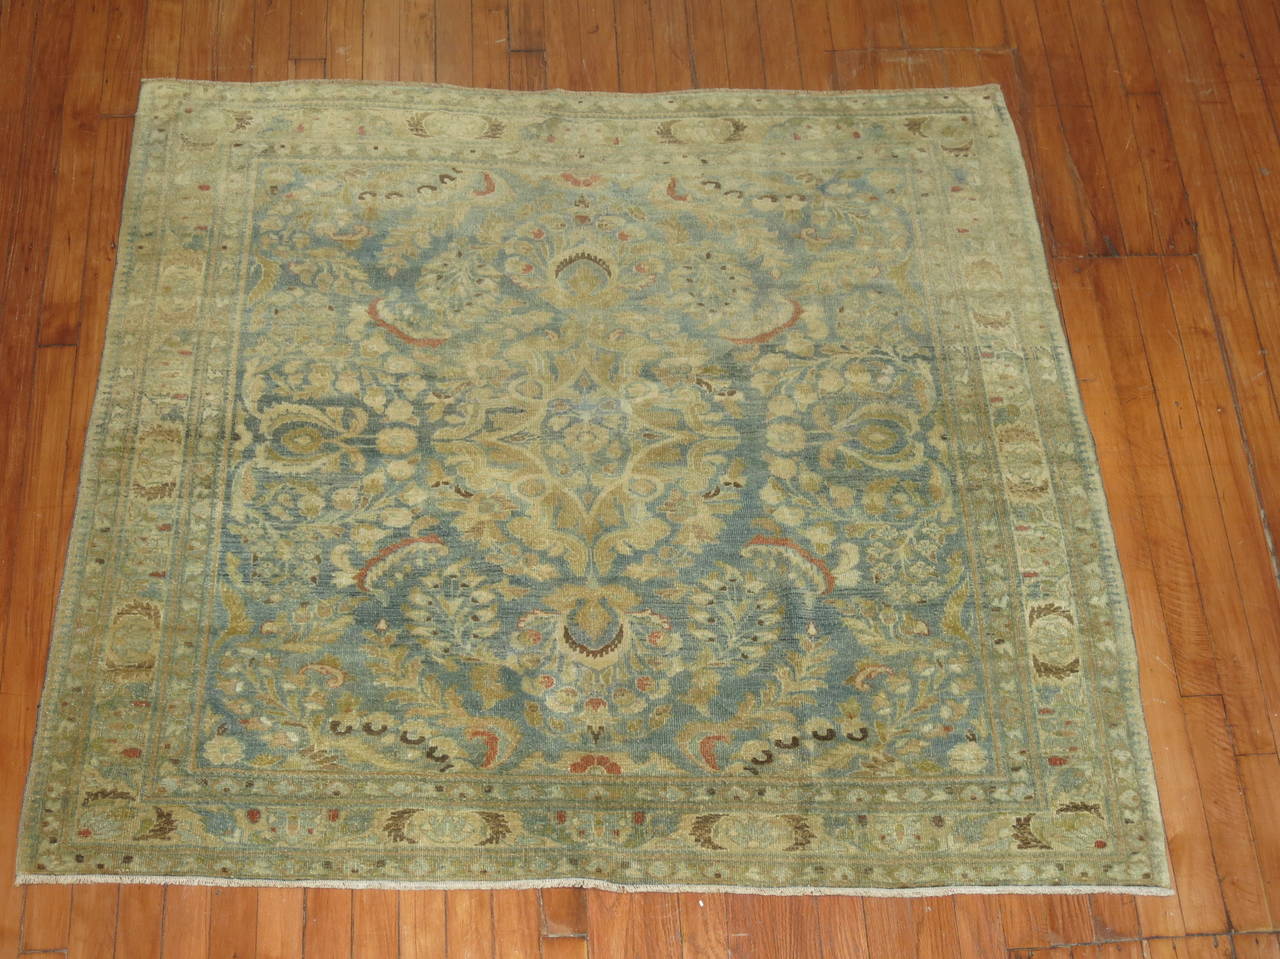 4 foot square rug